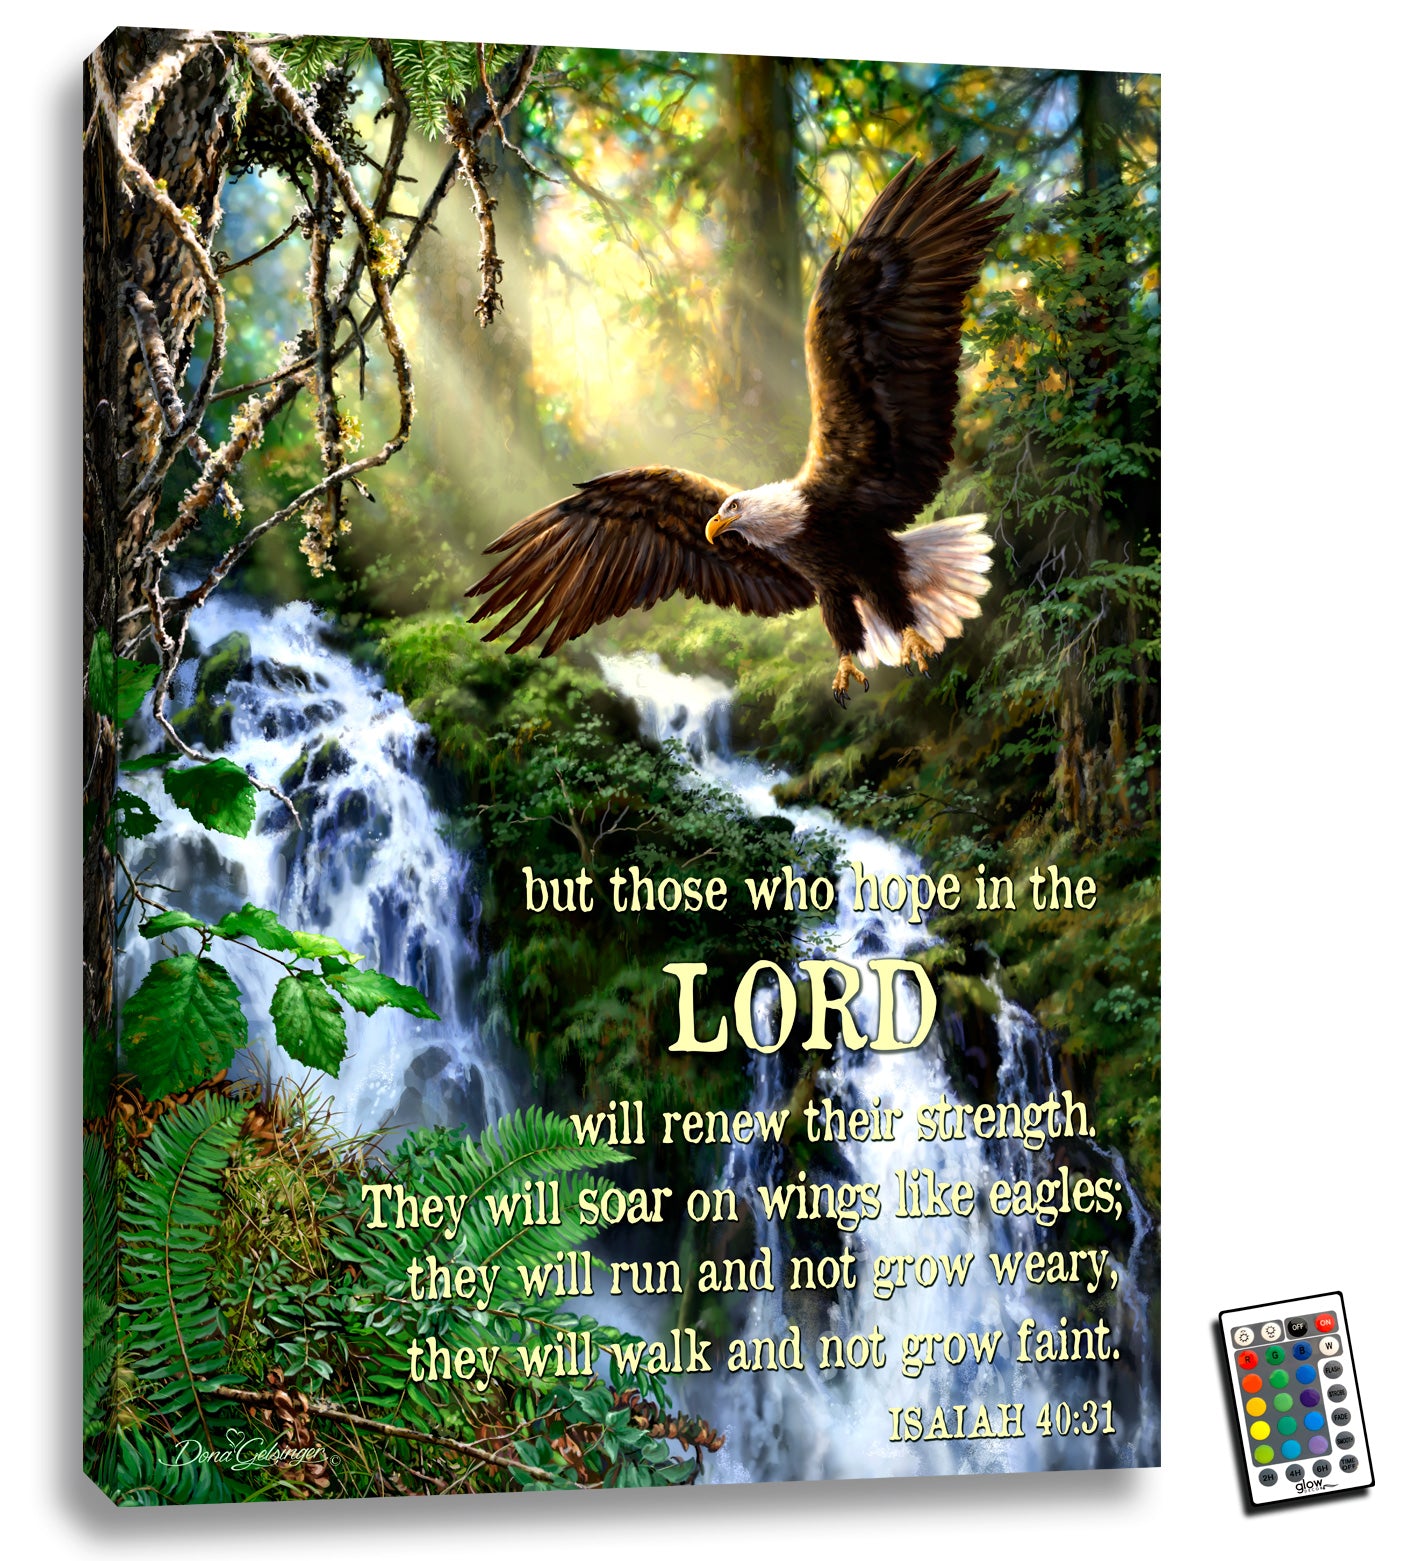  This stunning 18x24 canvas features a majestic bald eagle soaring over a peaceful stream, with rays of light filtering through the surrounding forest.  But that's not all - this artwork also features the uplifting words of Isaiah 40:31